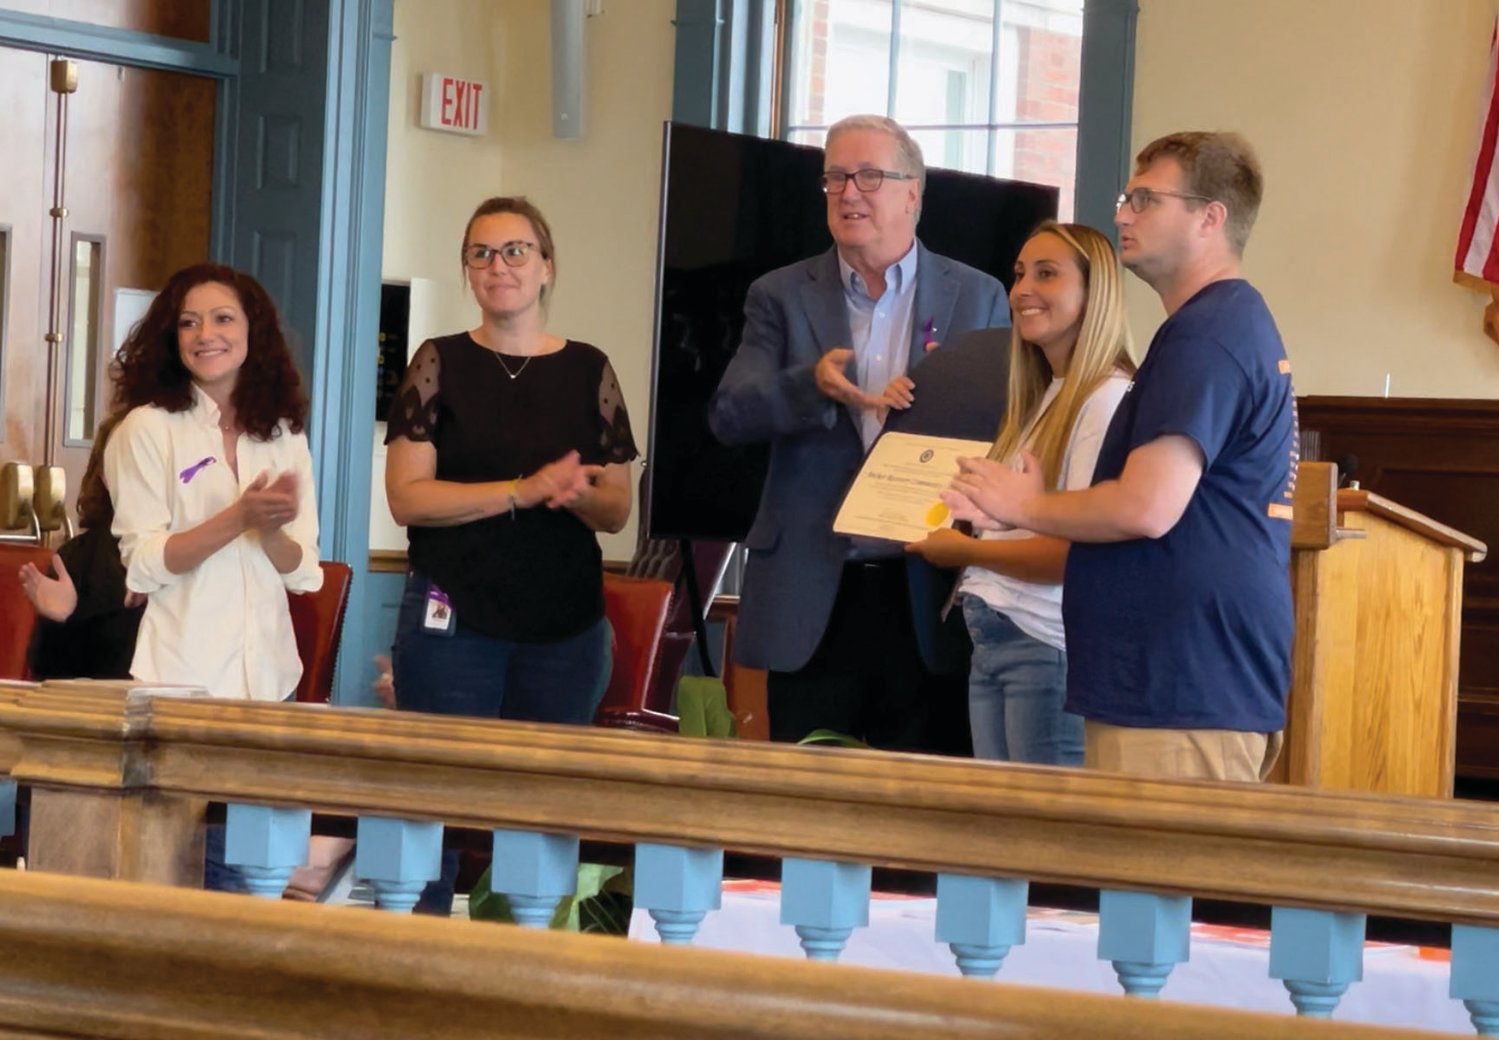 FROM THE CITY:  Mayor Ken Hopkins presents a citation from the city to representatives of Anchor Recovery during last week’s Recovery Month event.